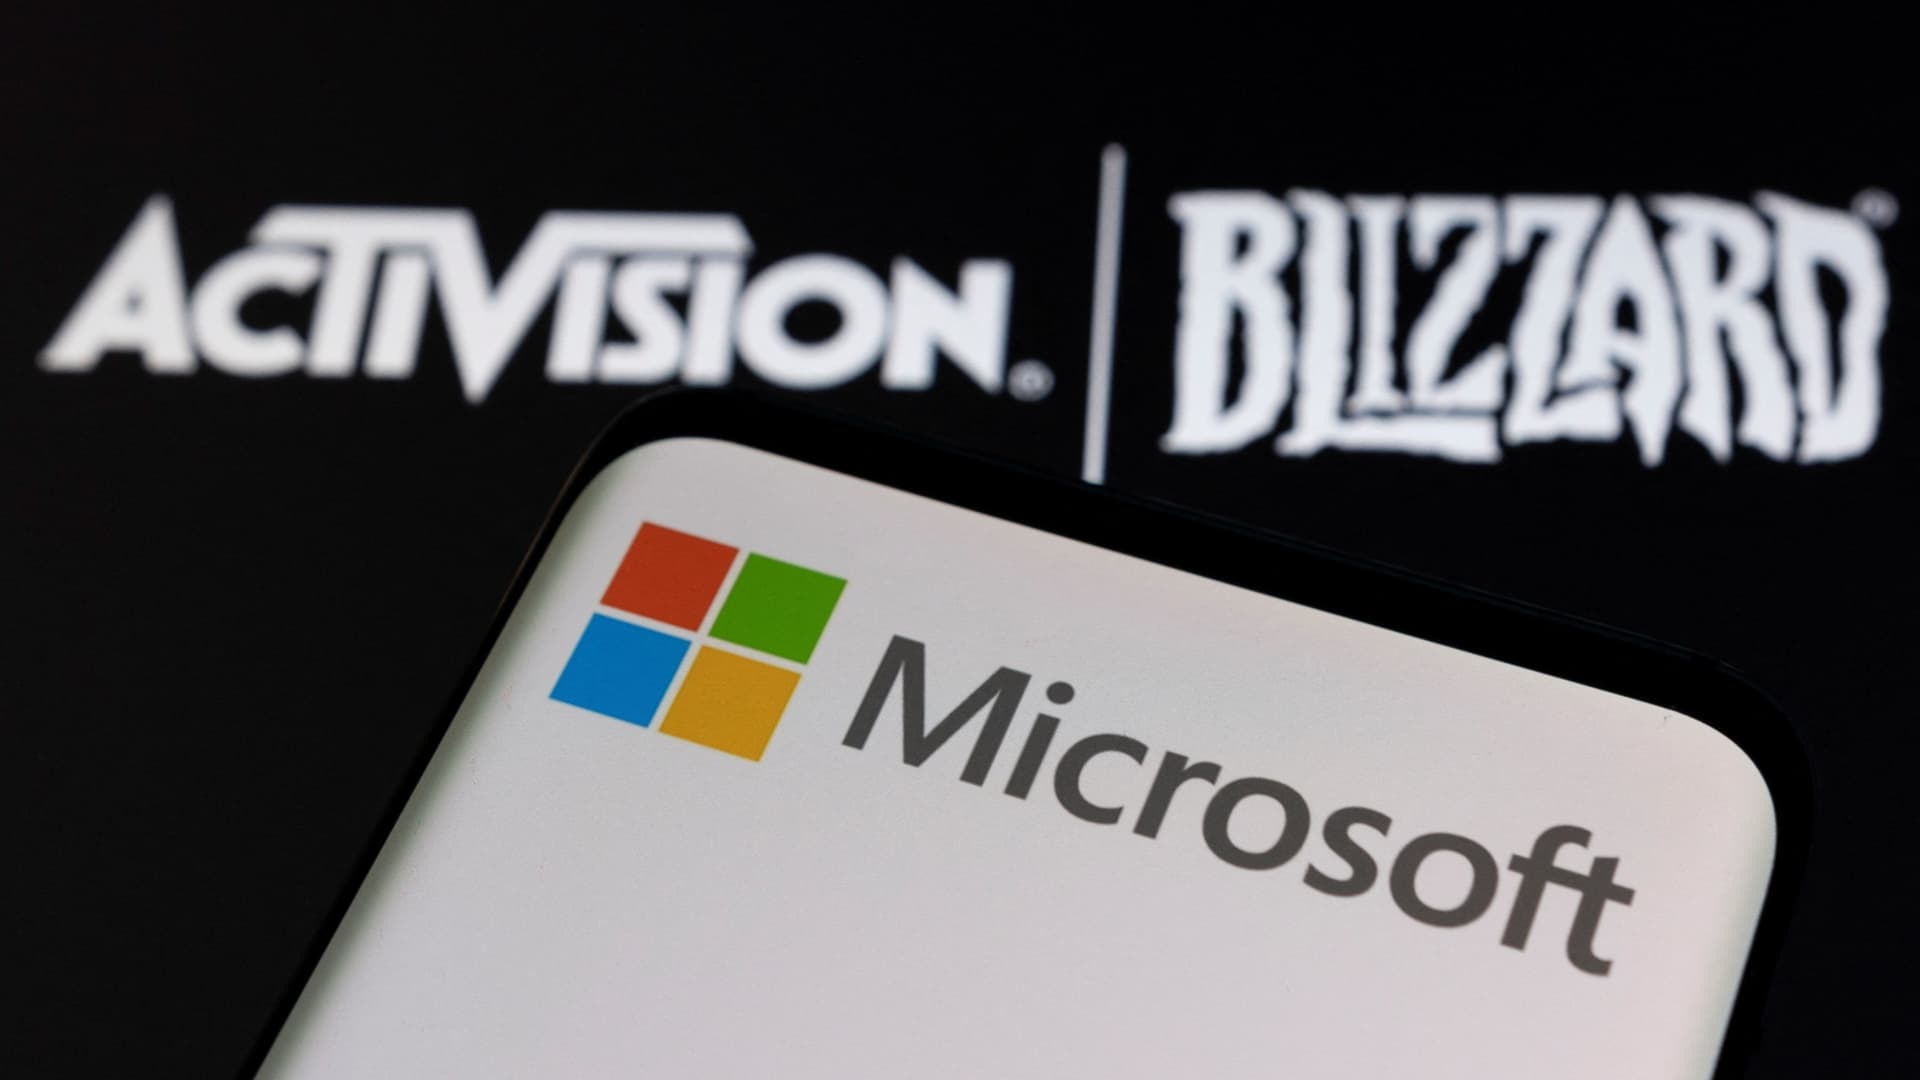 The acquisition of Microsoft-Activision Blizzard has been approved by the British regulatory body CMA